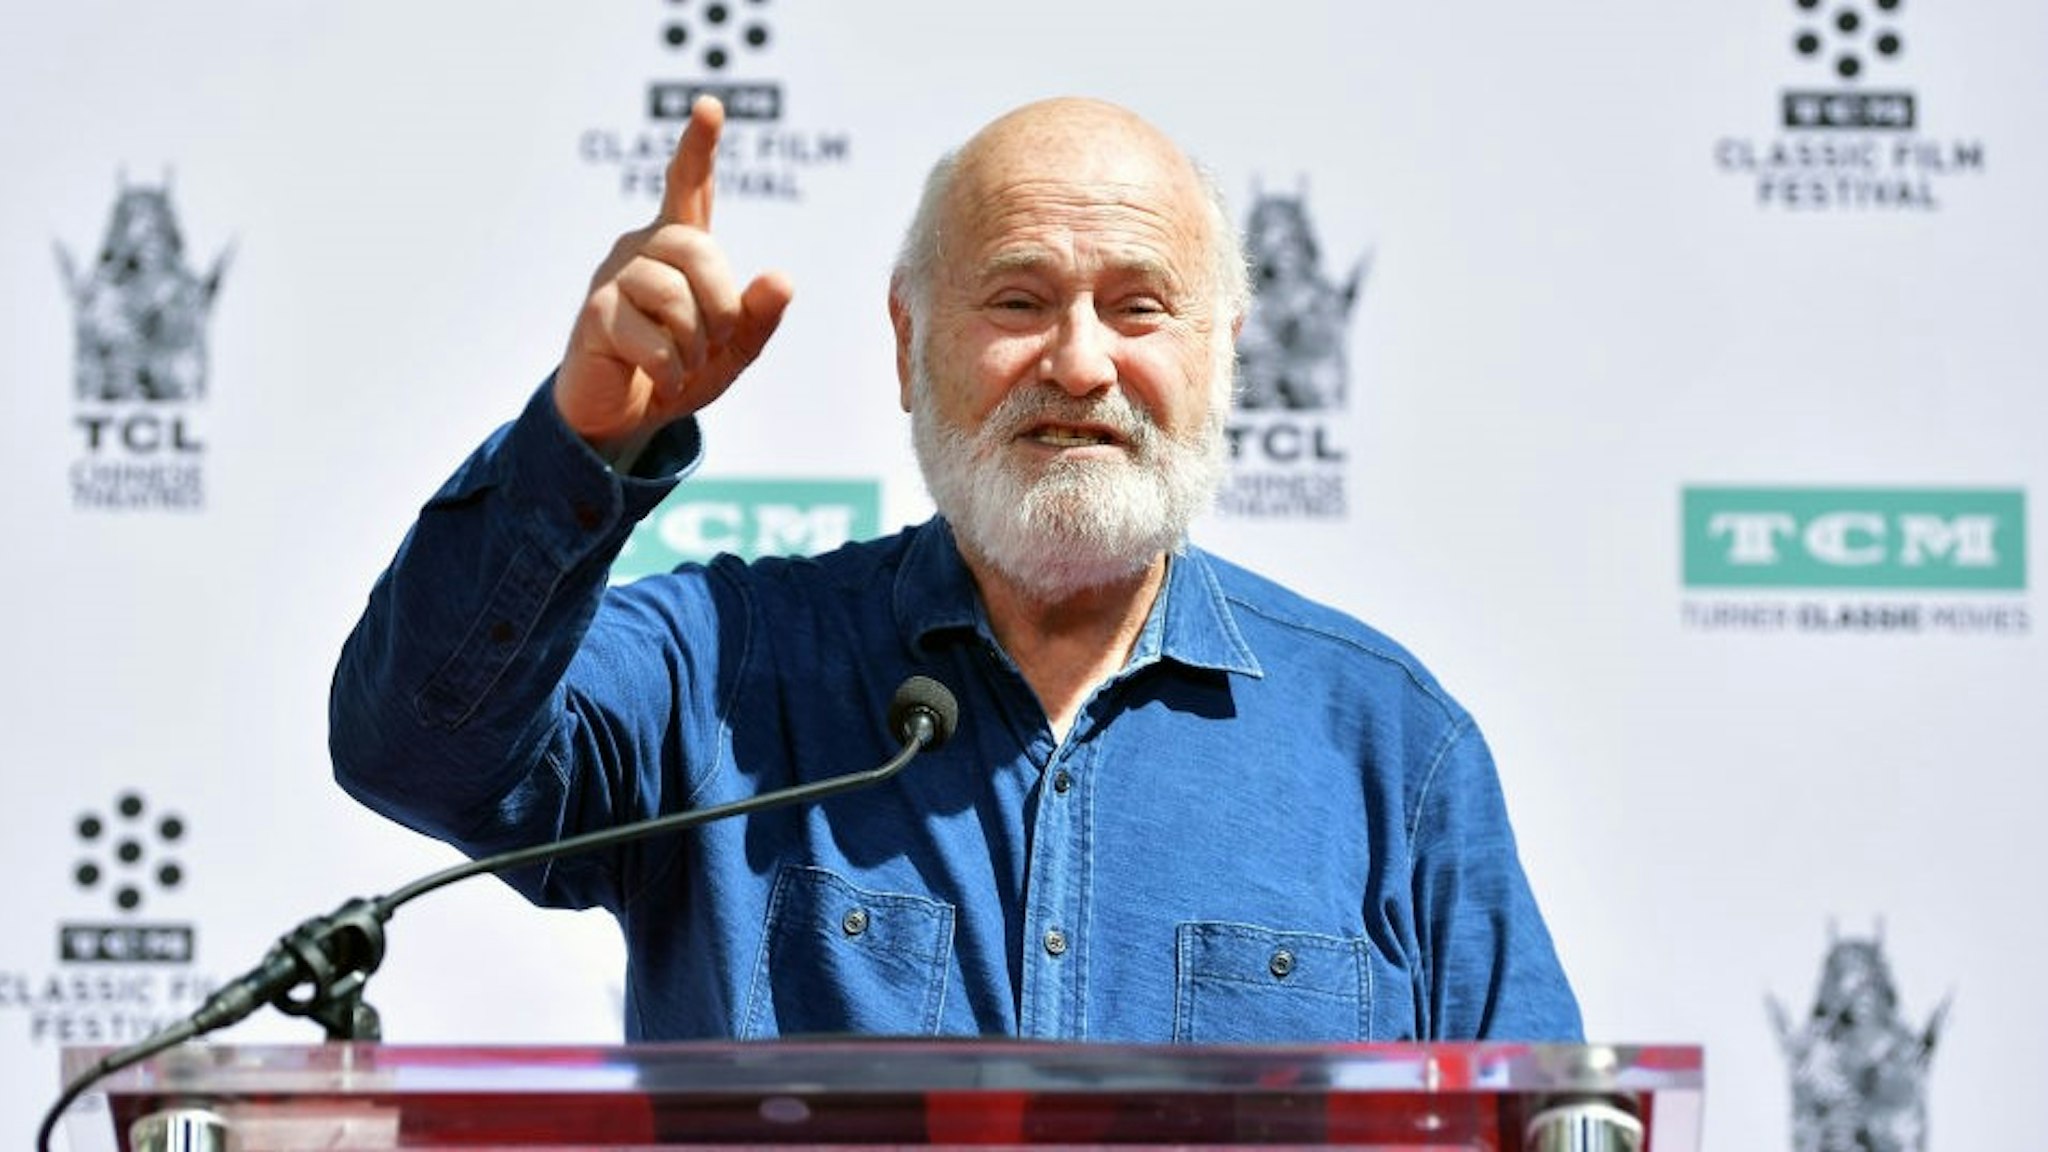 HOLLYWOOD, CALIFORNIA - APRIL 12: Rob Reiner speaks onstage at the Hand and Footprint Ceremony: Billy Crystal at the 2019 10th Annual TCM Classic Film Festival on April 12, 2019 in Hollywood, California. (Photo by